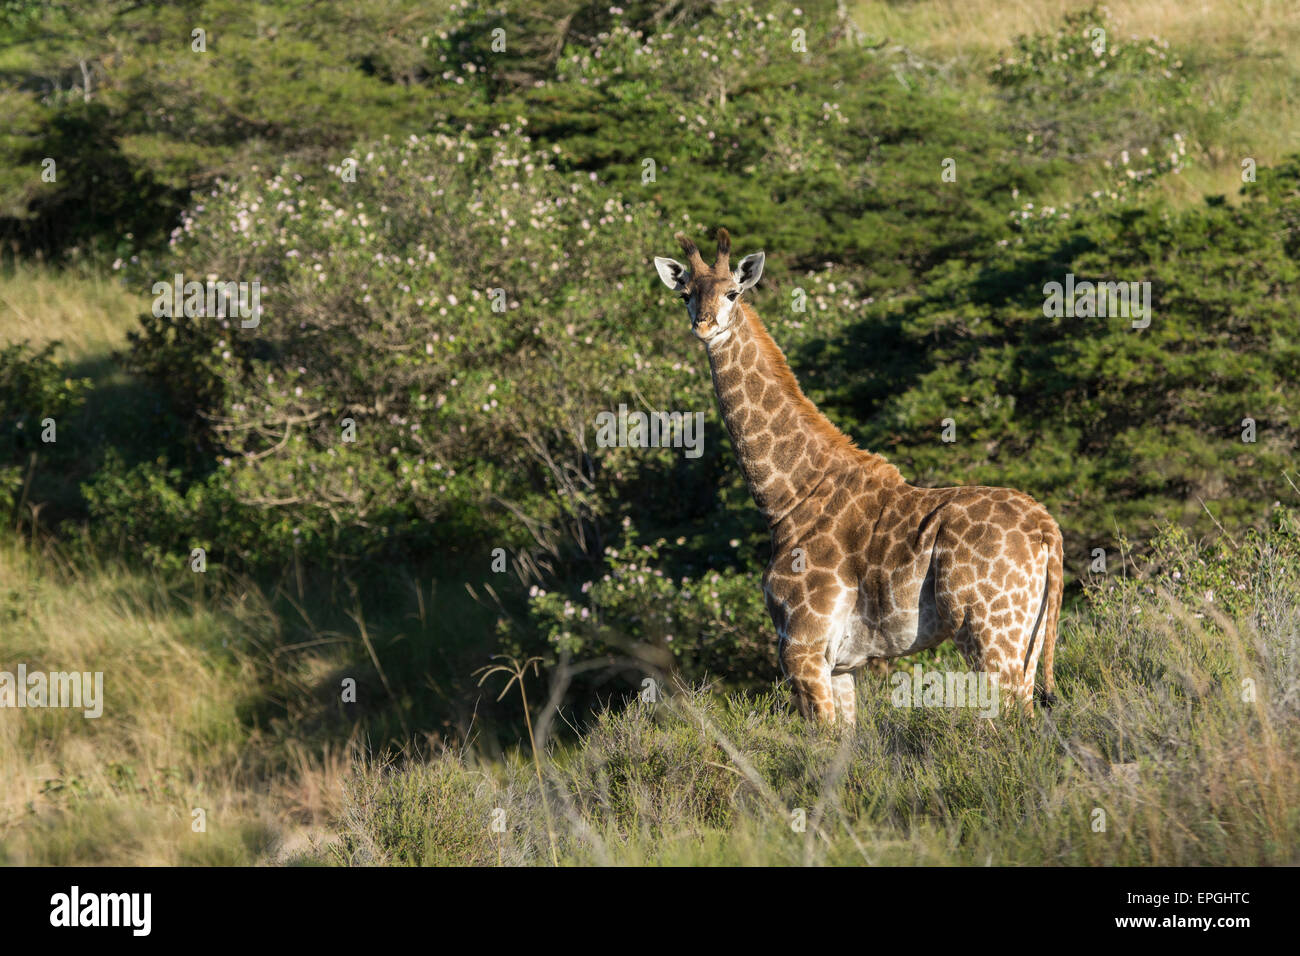 South Africa, Eastern Cape, East London. Inkwenkwezi Game Reserve. Young giraffe (Wild: Giraffa camelopardalis) in grasslands. Stock Photo